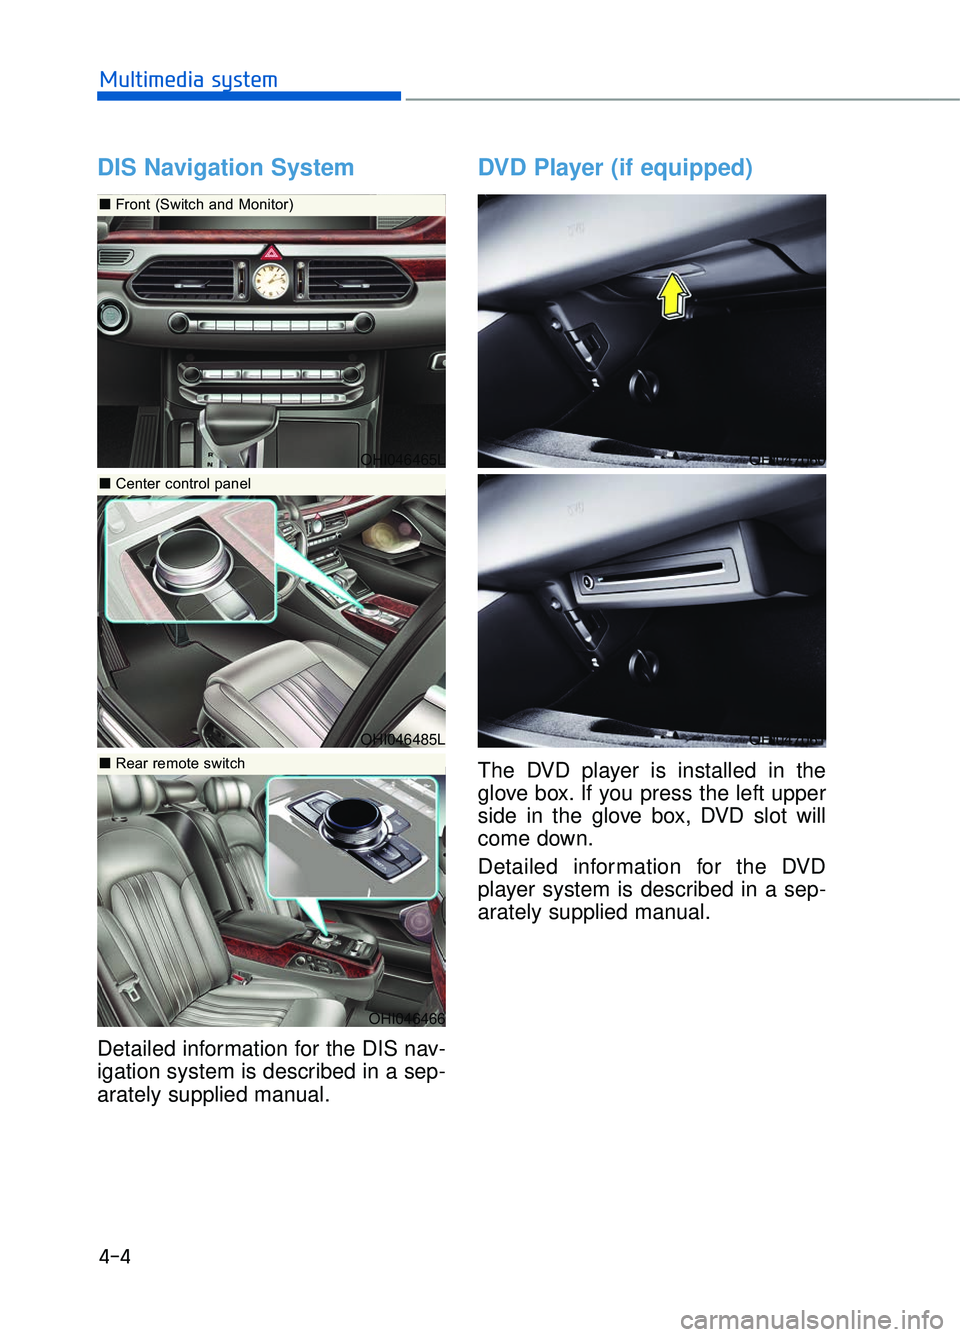 GENESIS G90 2018  Owners Manual DIS Navigation System
Detailed information for the DIS nav-
igation system is described in a sep-
arately supplied manual.
DVD Player (if equipped)
The DVD player is installed in the
glove box. If you